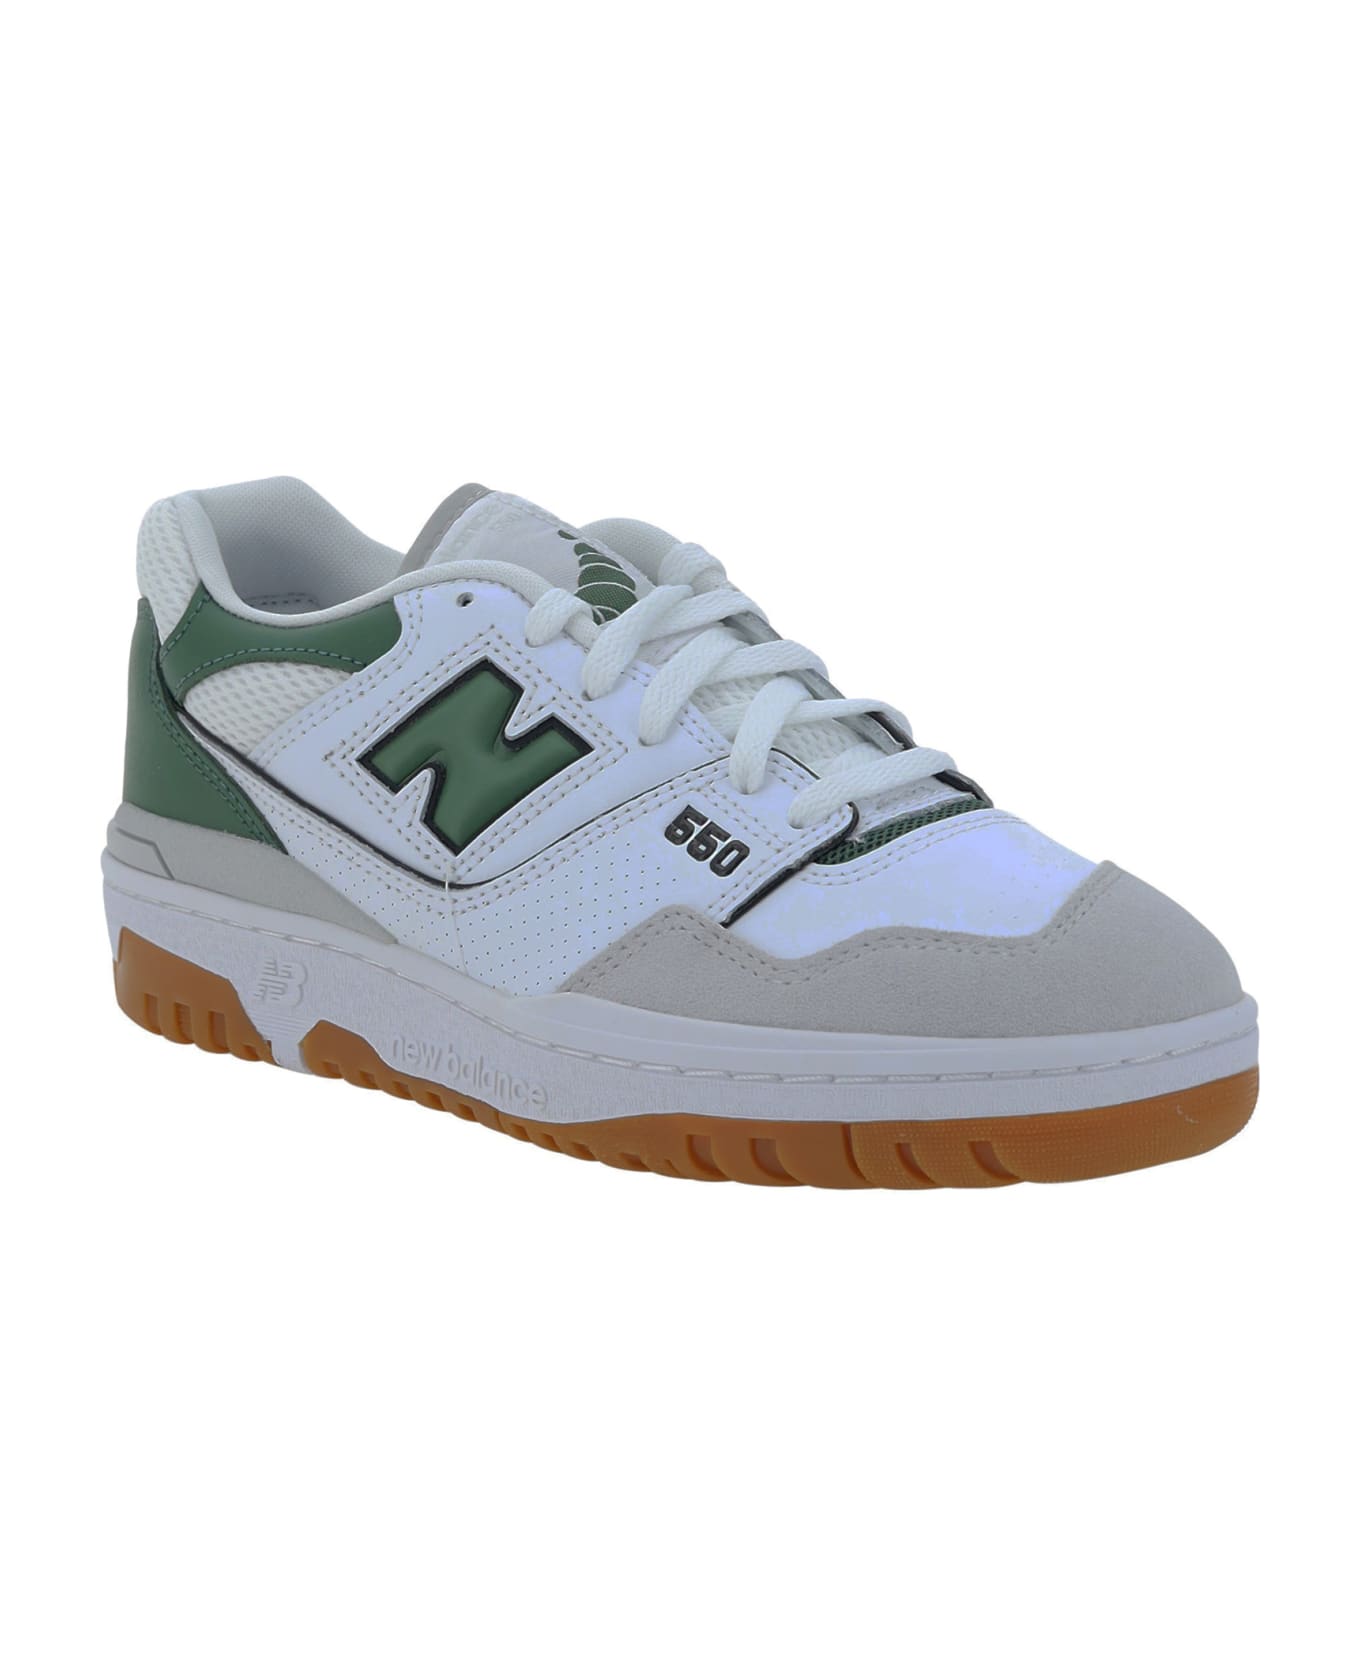 New Balance 550 Sneakers - White/green